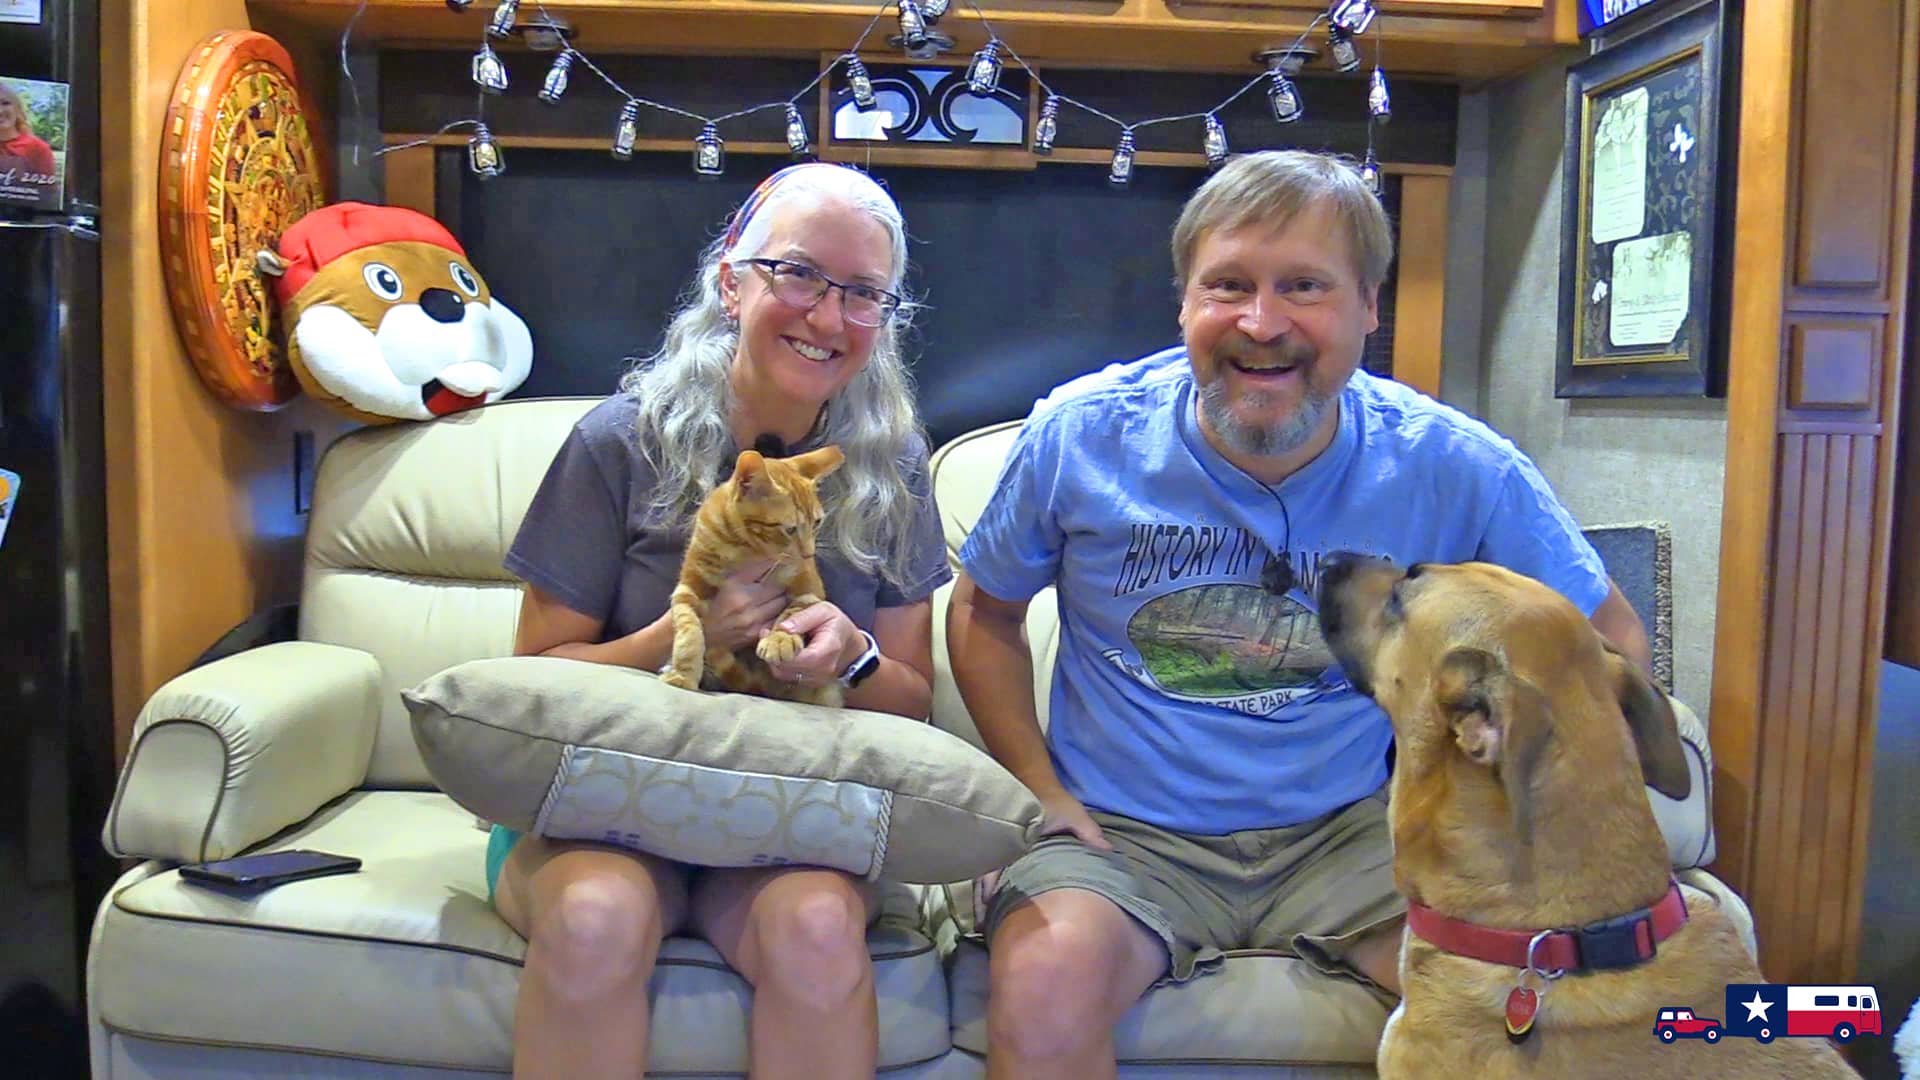 RVing with Pets